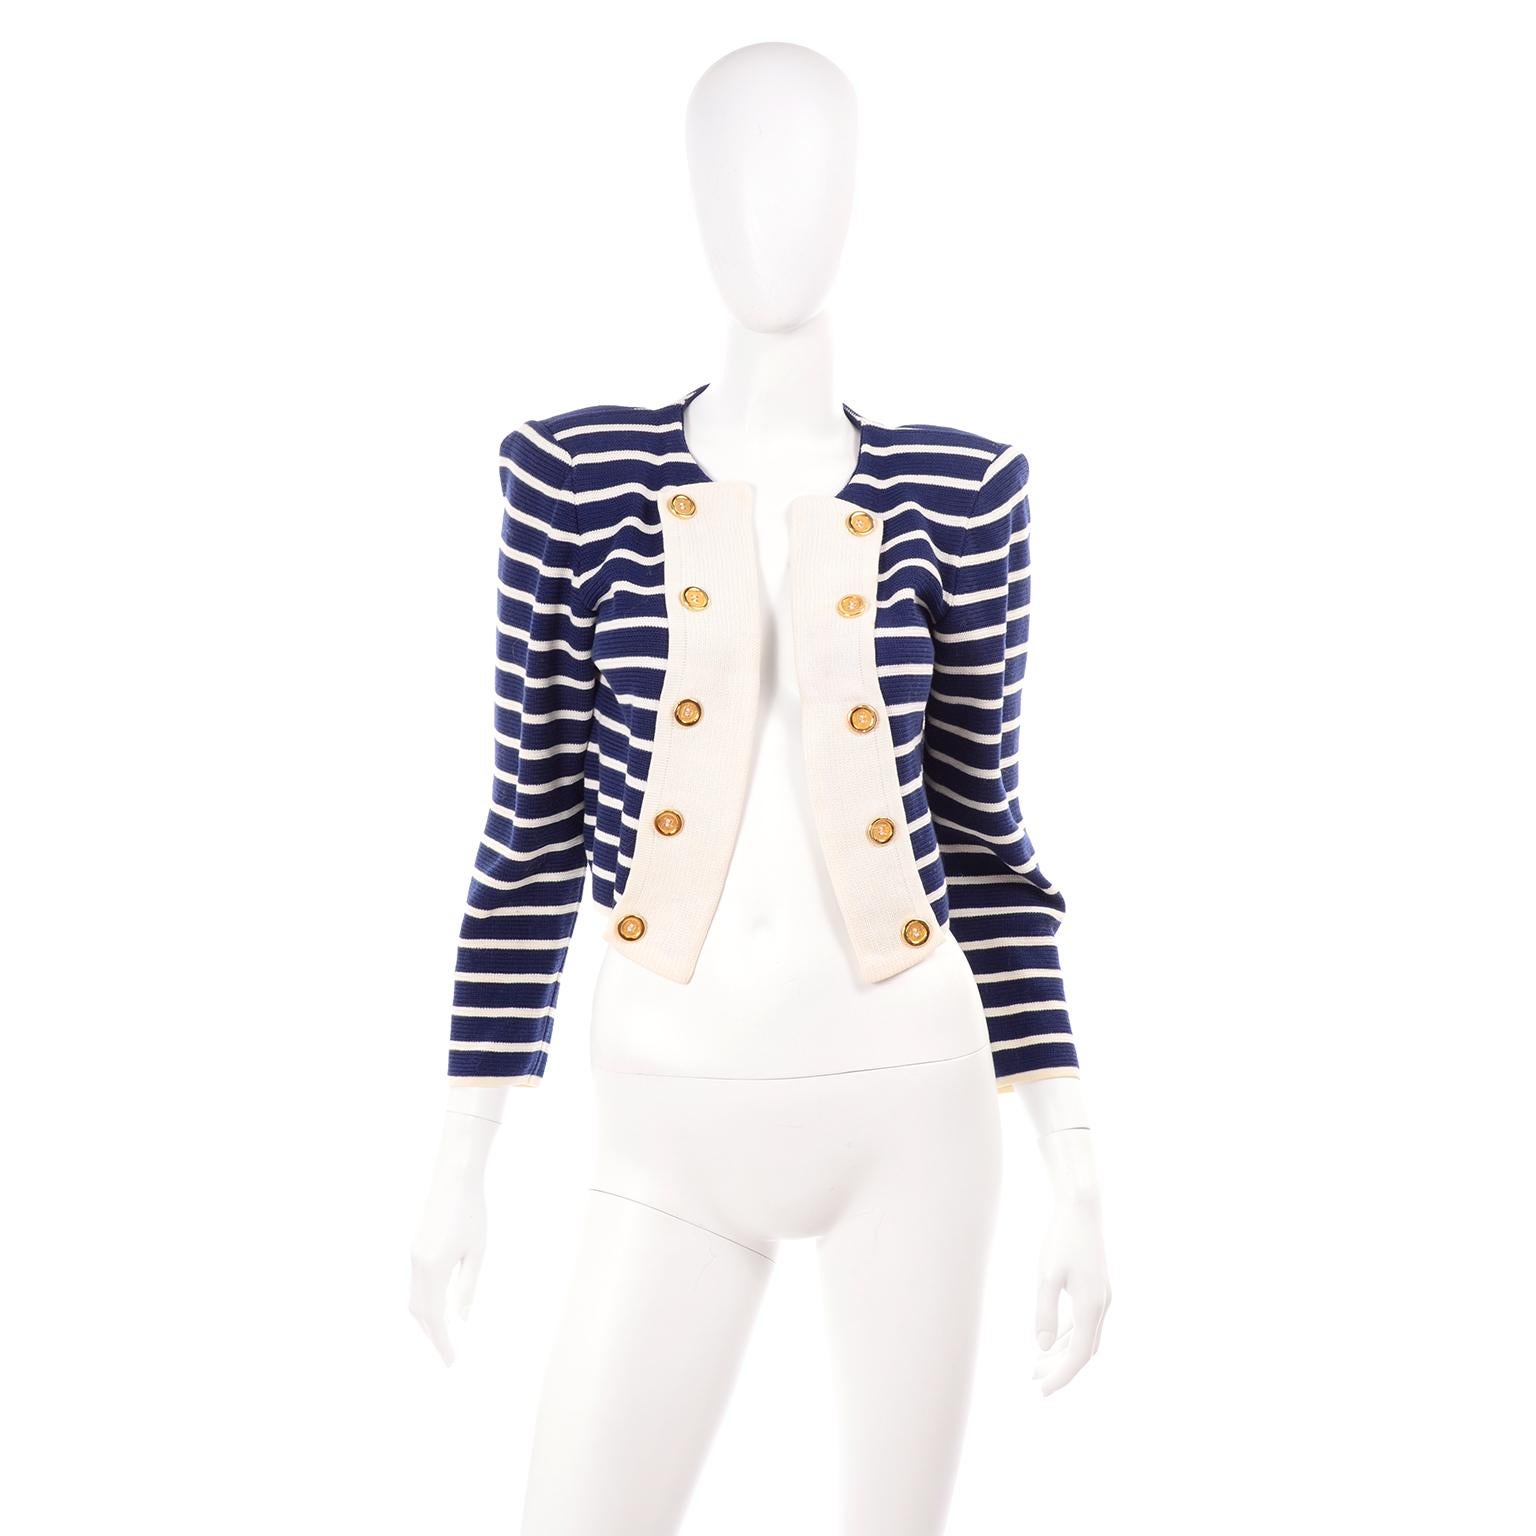 This vintage Yves Saint Laurent navy blue and white striped jacket is open in the front with pretty gold decorative metal buttons.  This YSL 100% cotton knit jacket is perfectly cropped and has shoulder pads for structure. The perfect summer jacket